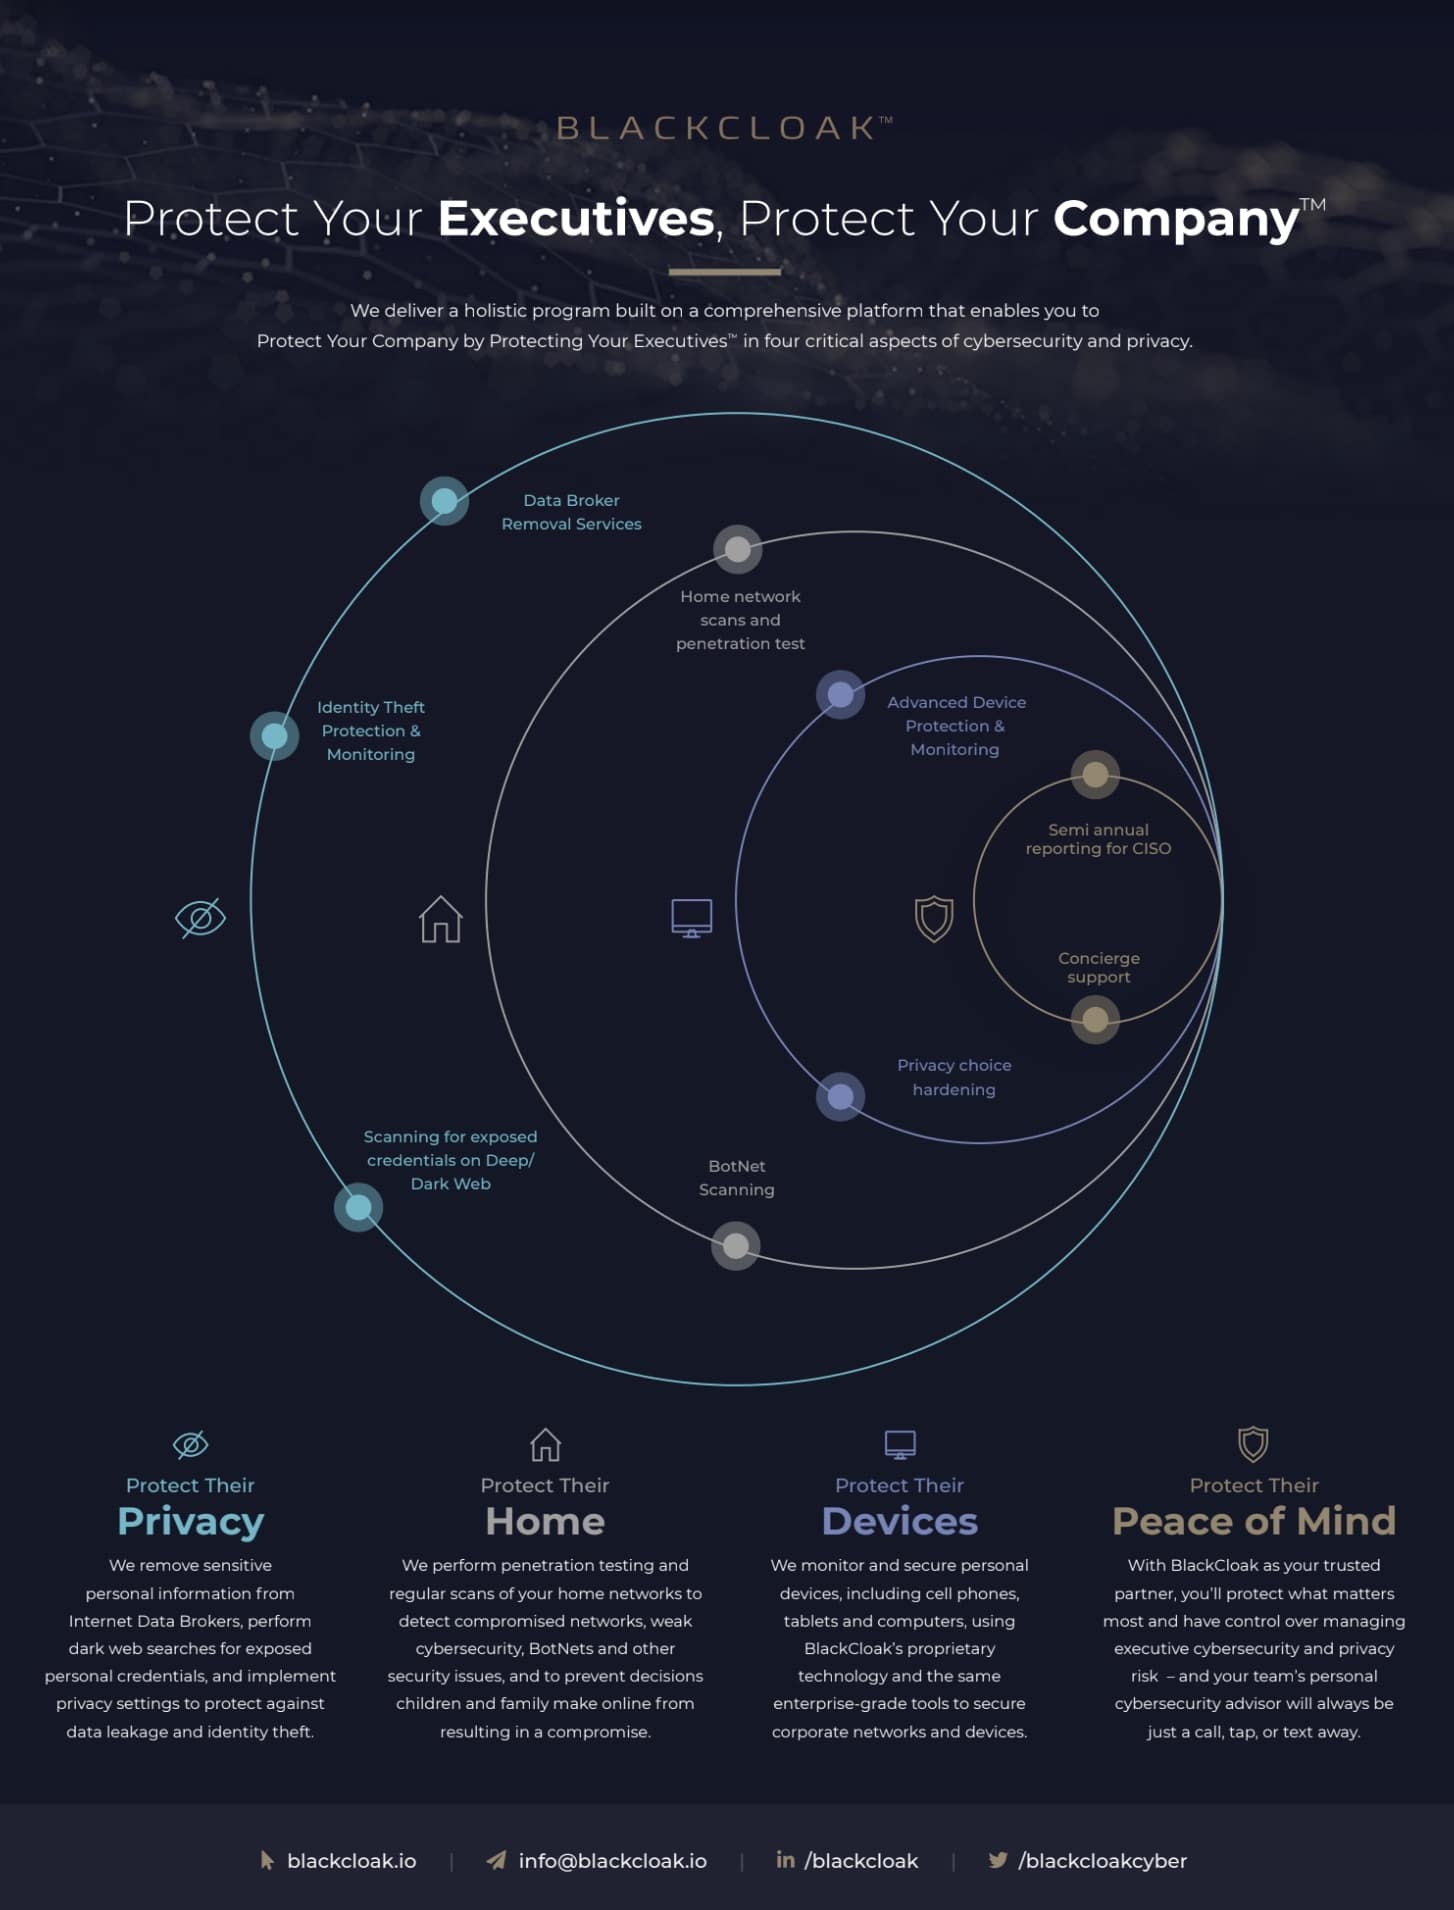 One Page Overview Concentric Circles of BlackCloak executive cybersecurity services